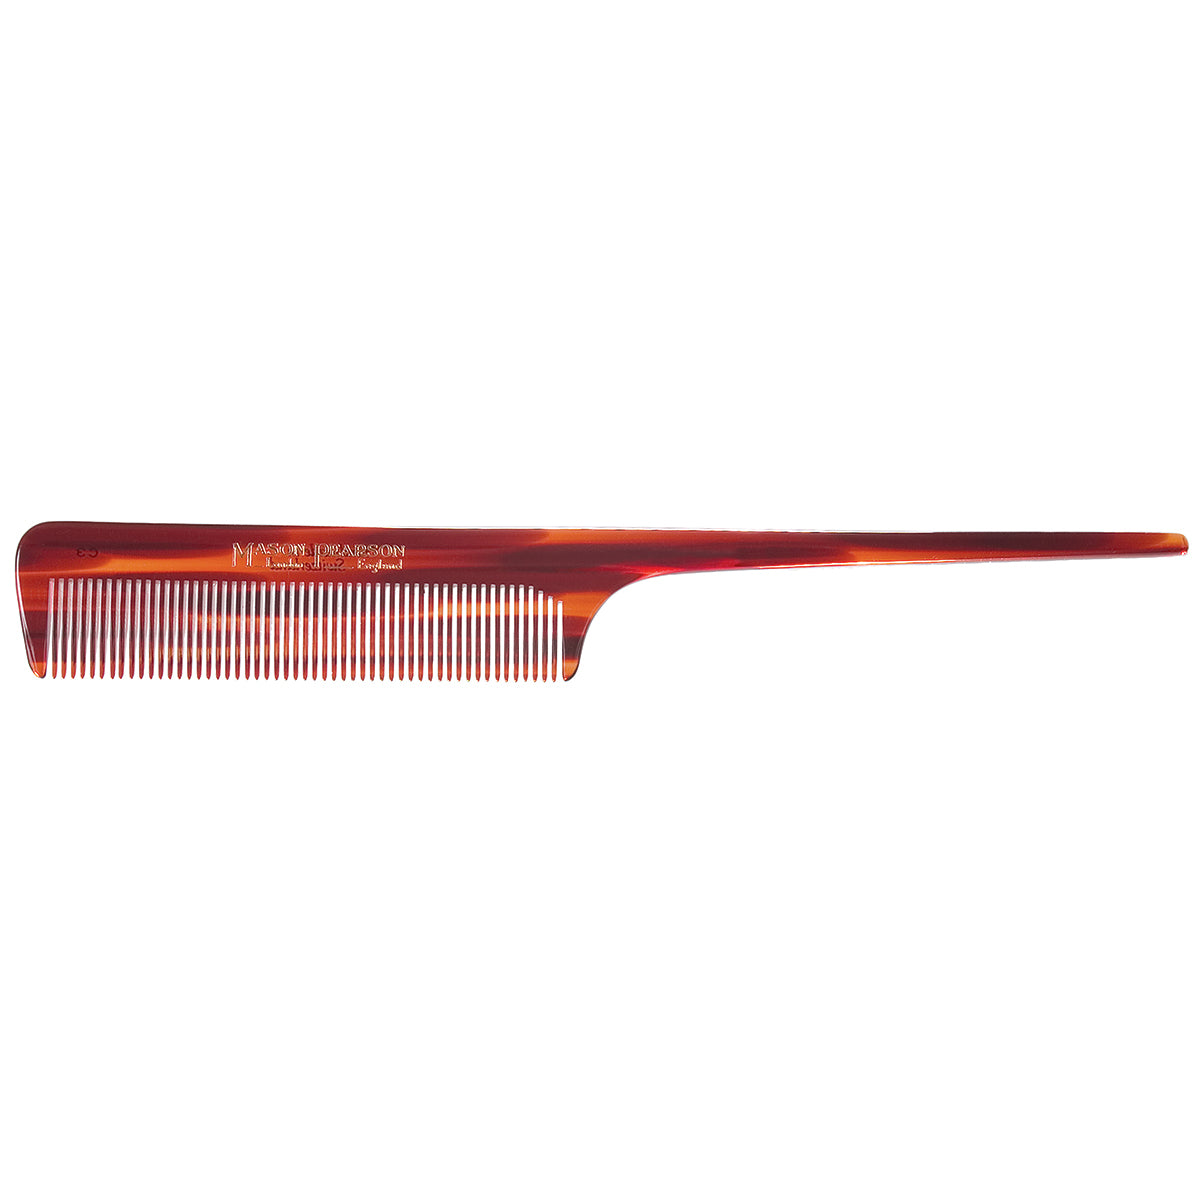 A long, red, plastic Mason Pearson Comb - Tail with fine teeth tapering to a pointed handle, isolated on a white background.